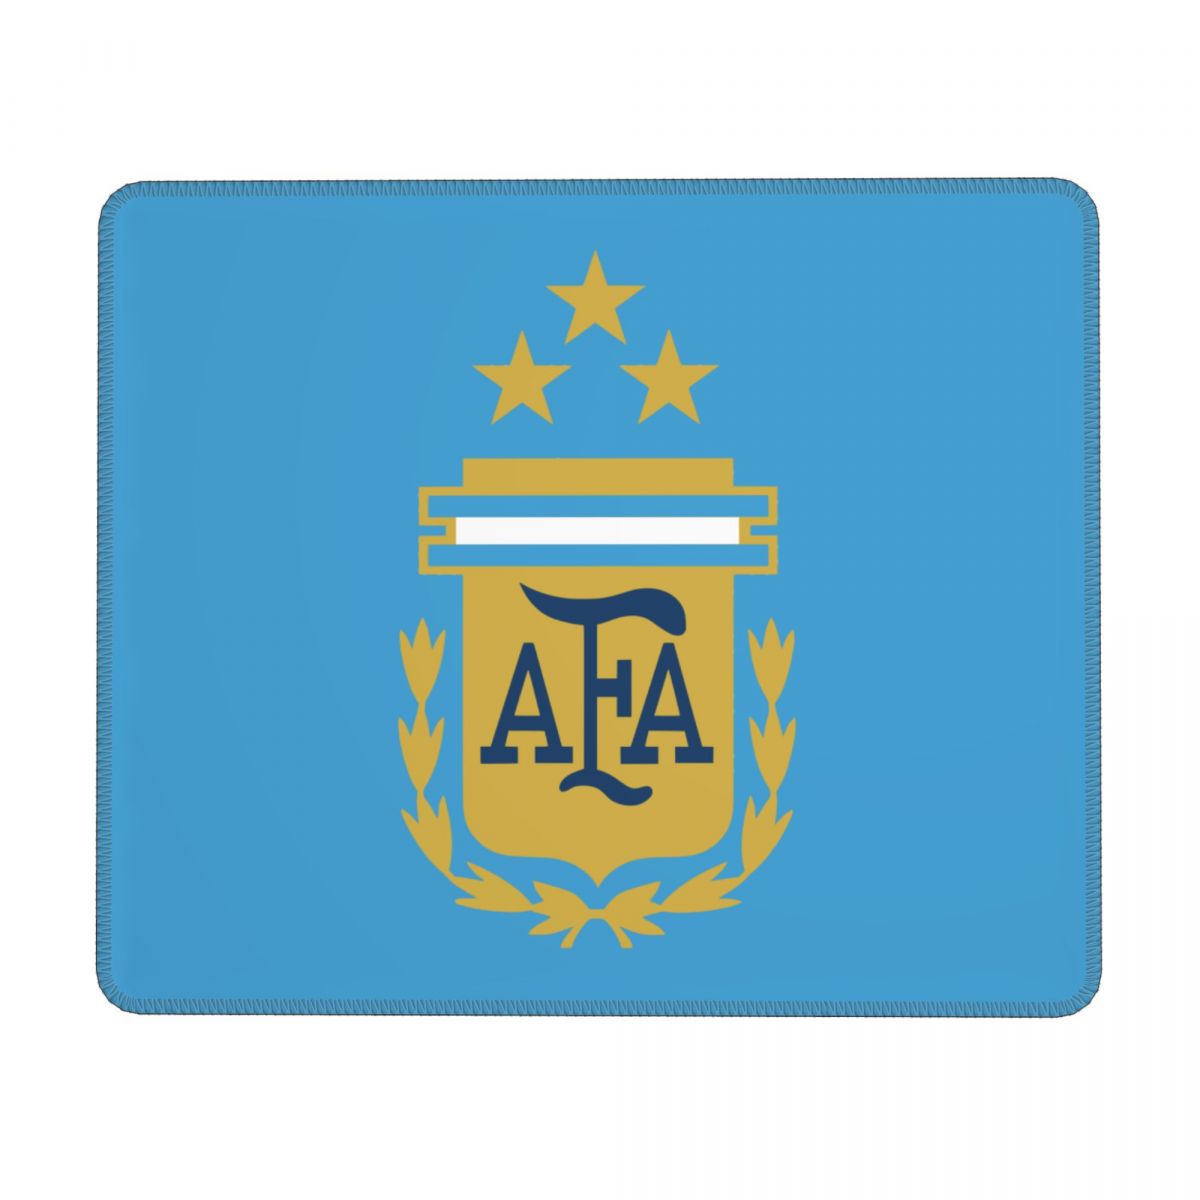 Argentina 3-Star Champions Square Waterproof Mouse Pad